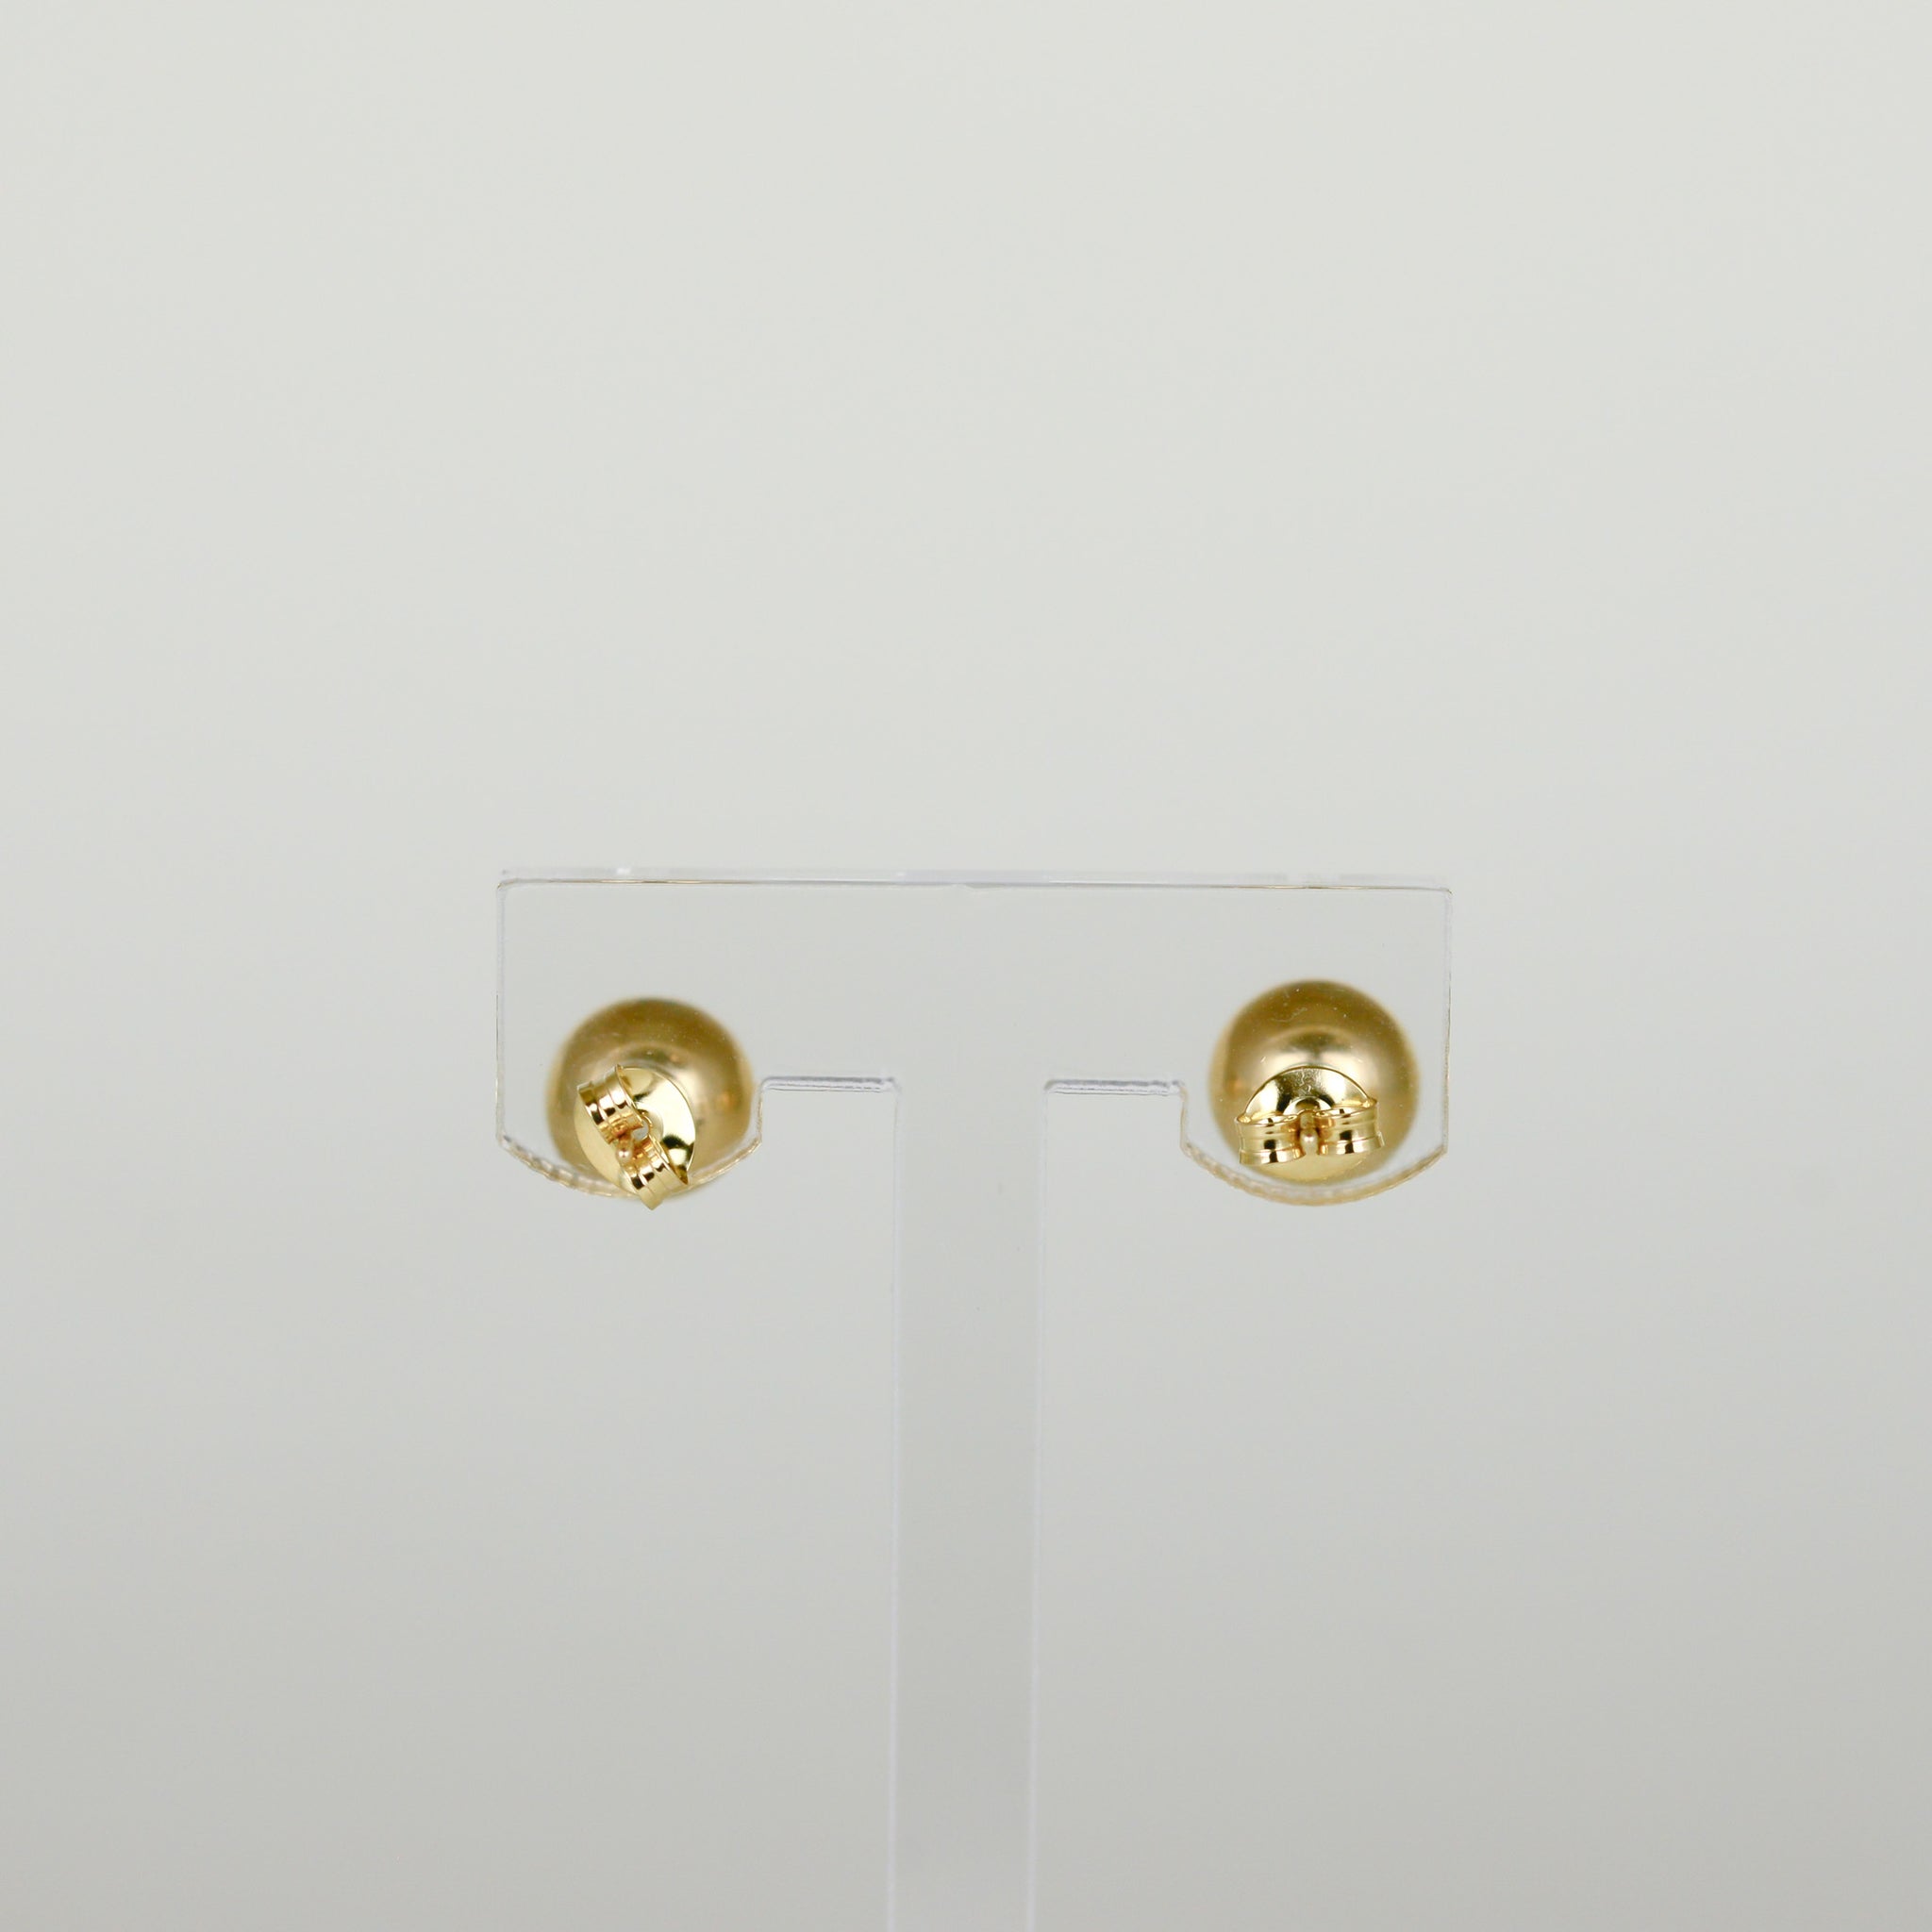 9ct Yellow Gold 8mm Hollow Ball Stud Earrings